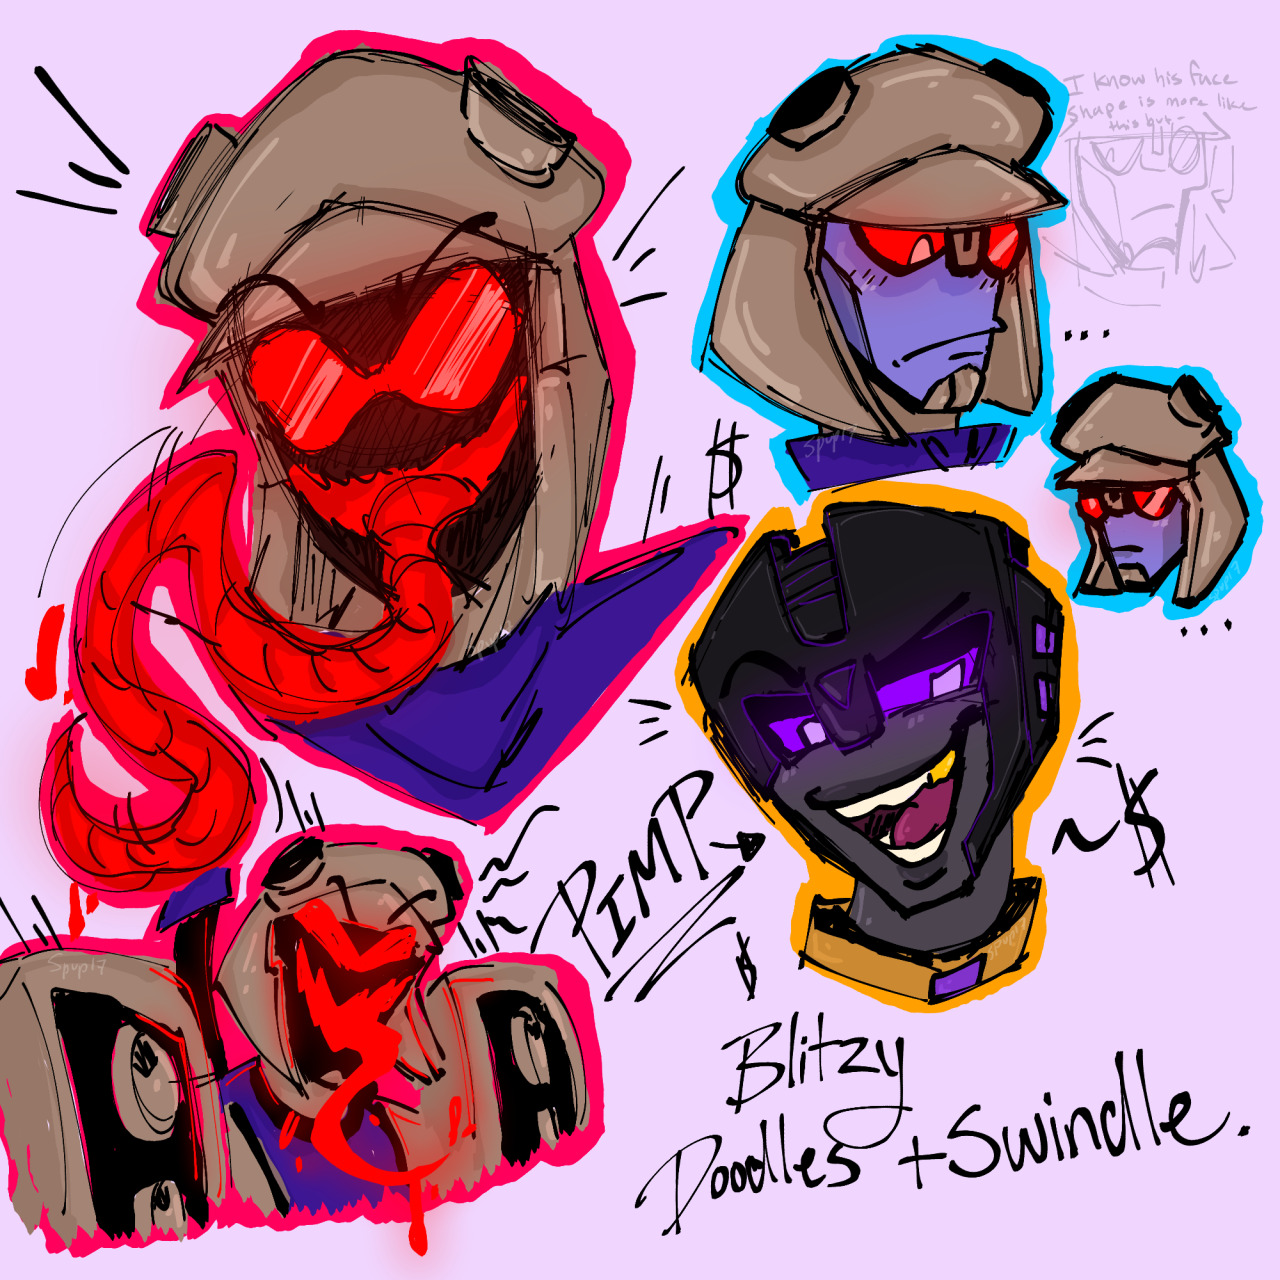 some tfa doodles,,,,I was in a Blitzwing mood! Swindle is there aswell #tfa#transformers animated#tfa blitzwing#tfa swindle#blitzwing#swindle#transformers#maccadam#transformers fanart#fanart#digital art#myart#suppy art#doodles